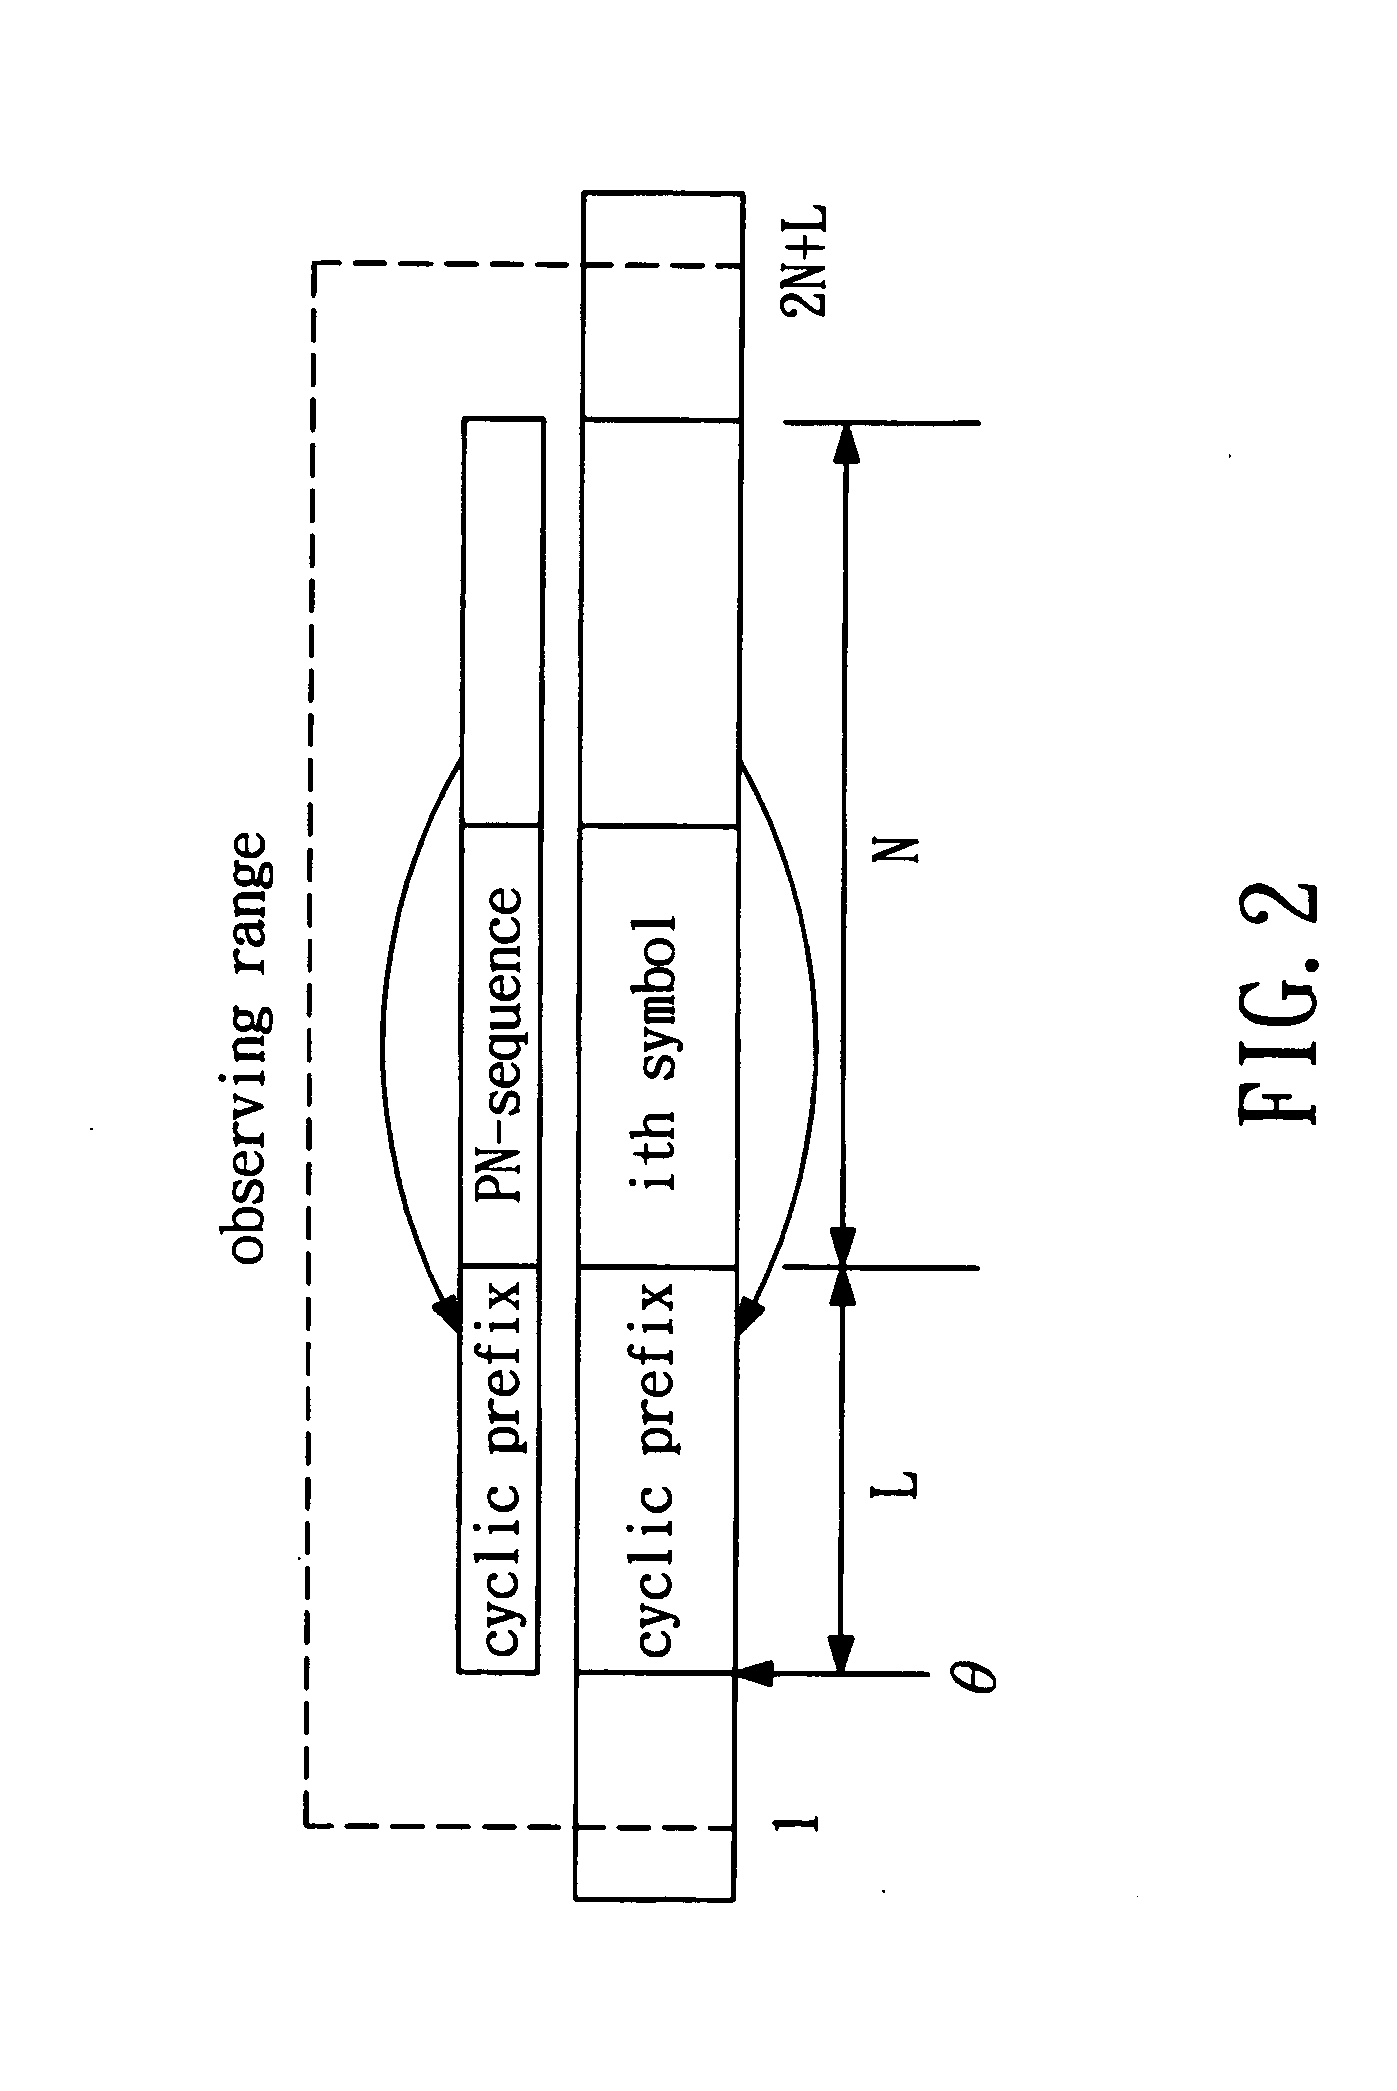 Orthogonal frequency division multiplexing system with PN-sequence